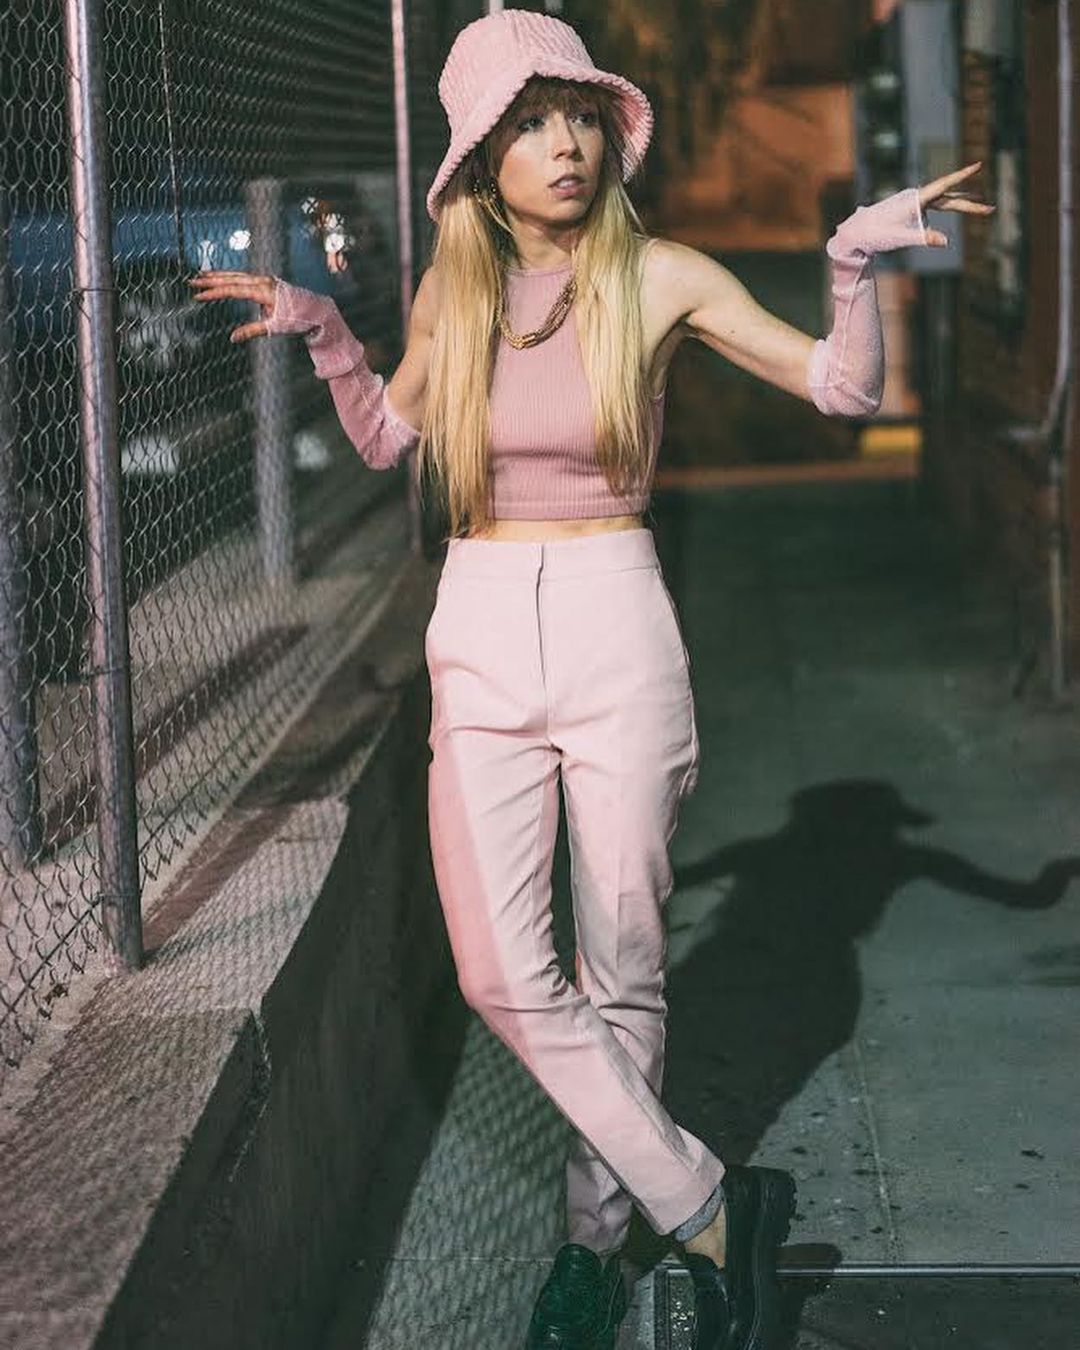 Jennette mccurdy 12 hottest pics, jennette mccurdy 12 instagram